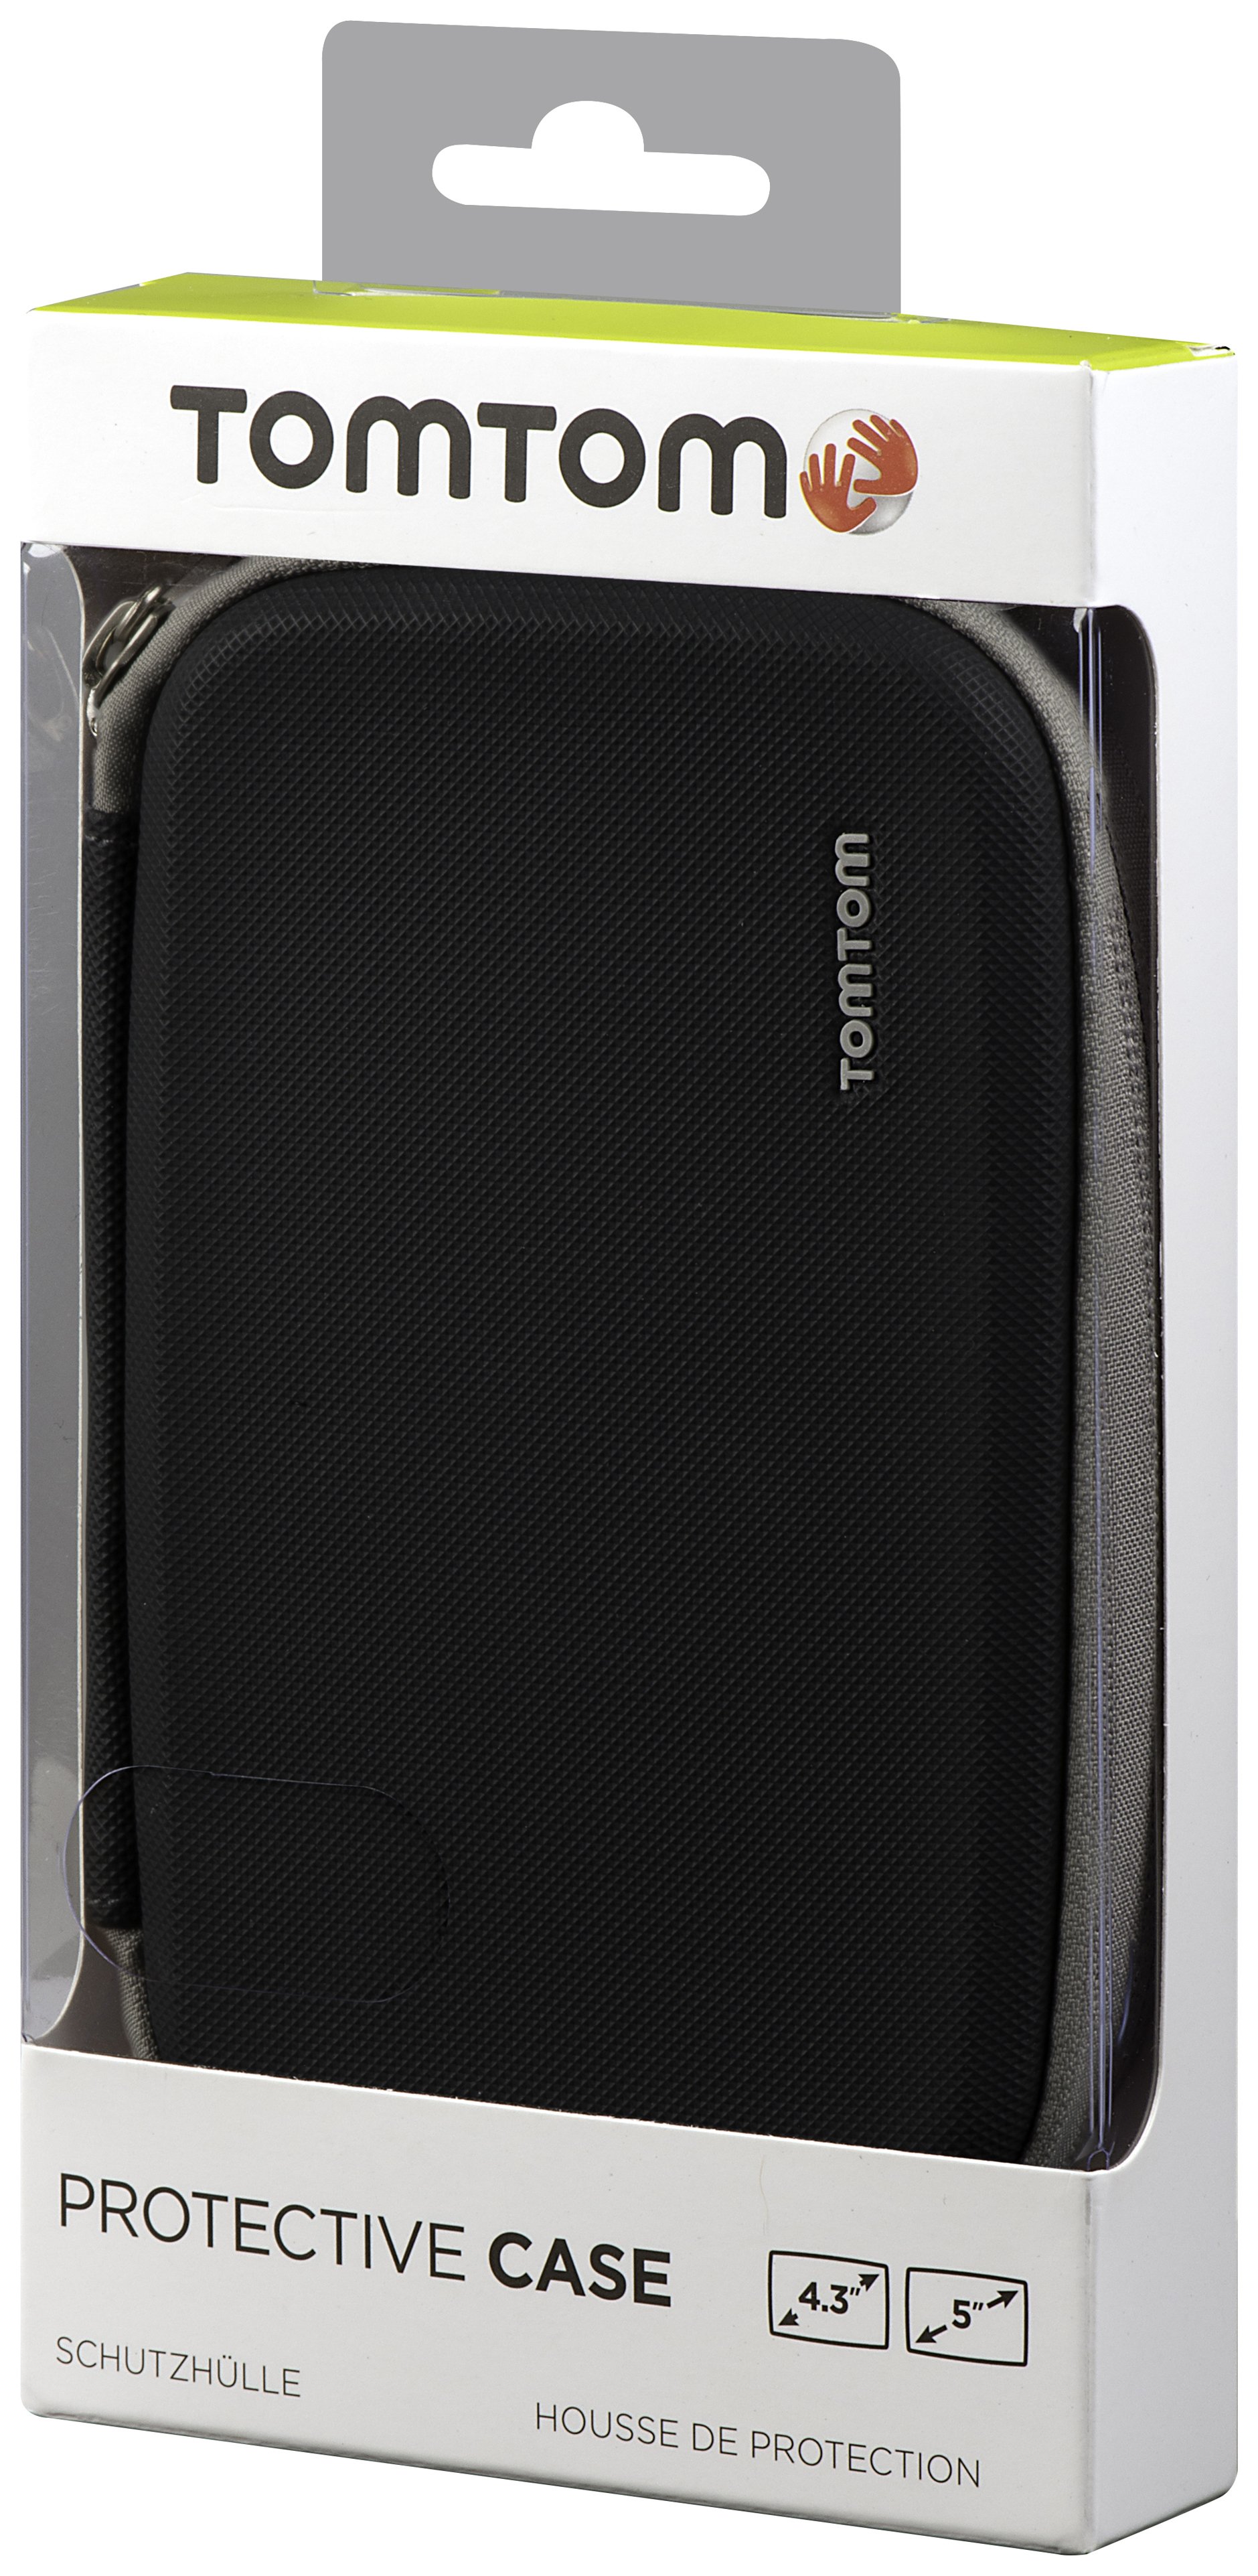 TomTom 4 to 5 Inch Classic Carry Case Review